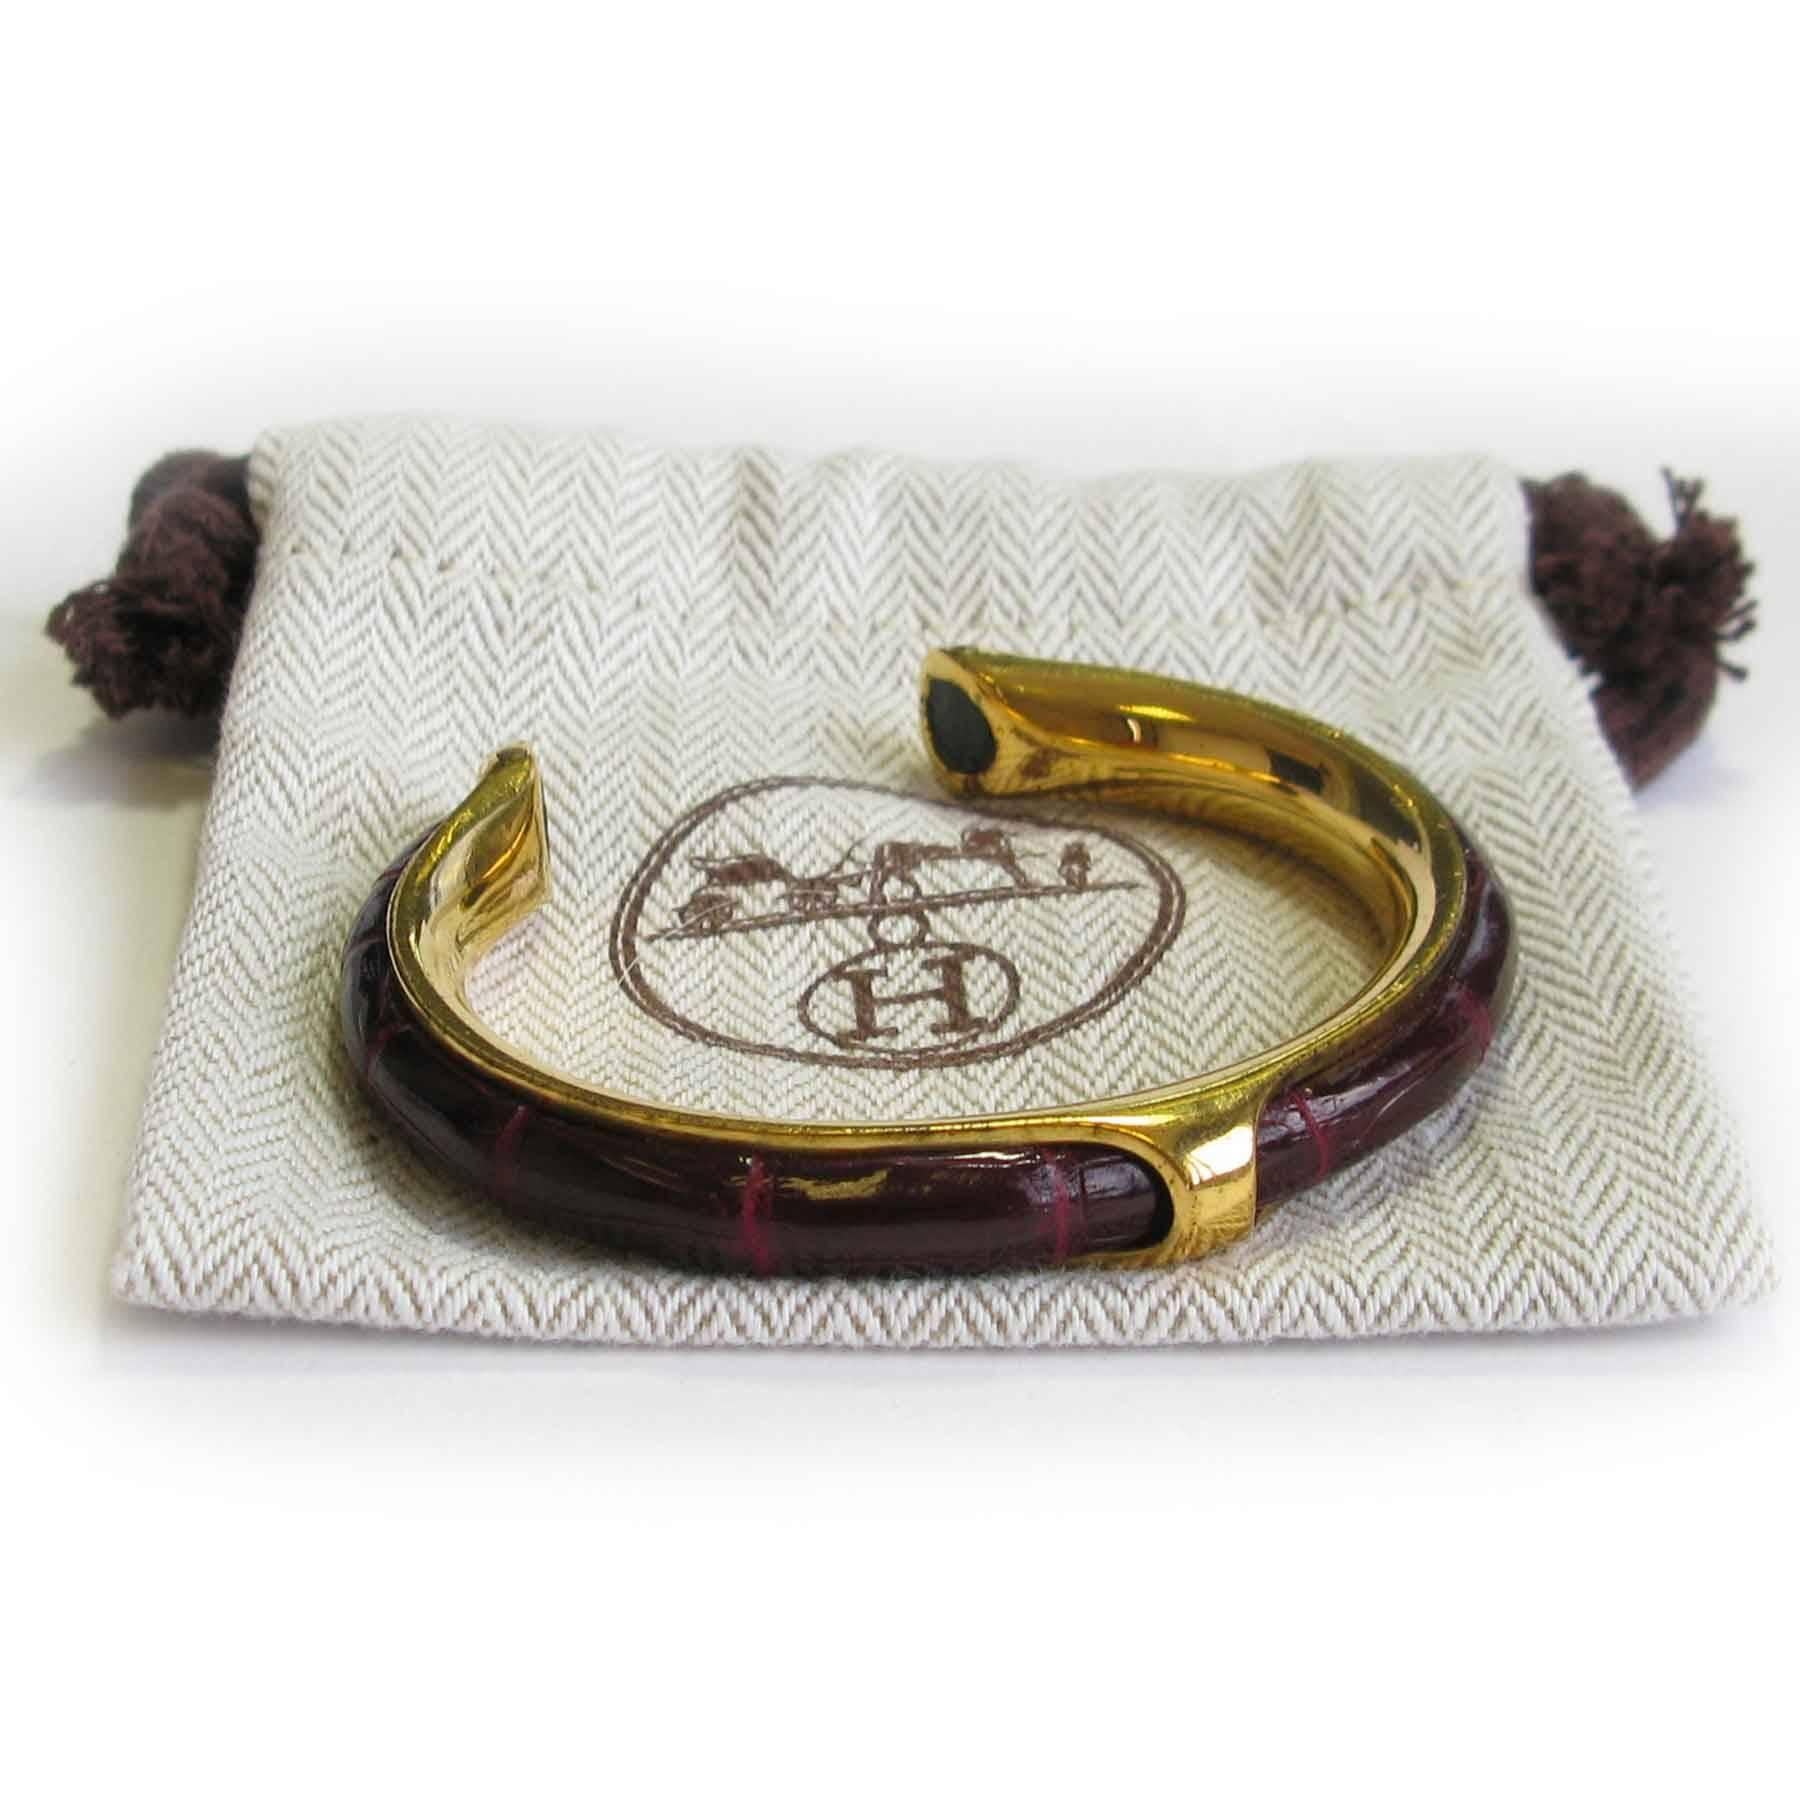 Vintage HERMES Bracelet in Gold Plated Metal and red H Crocodile Leather 1